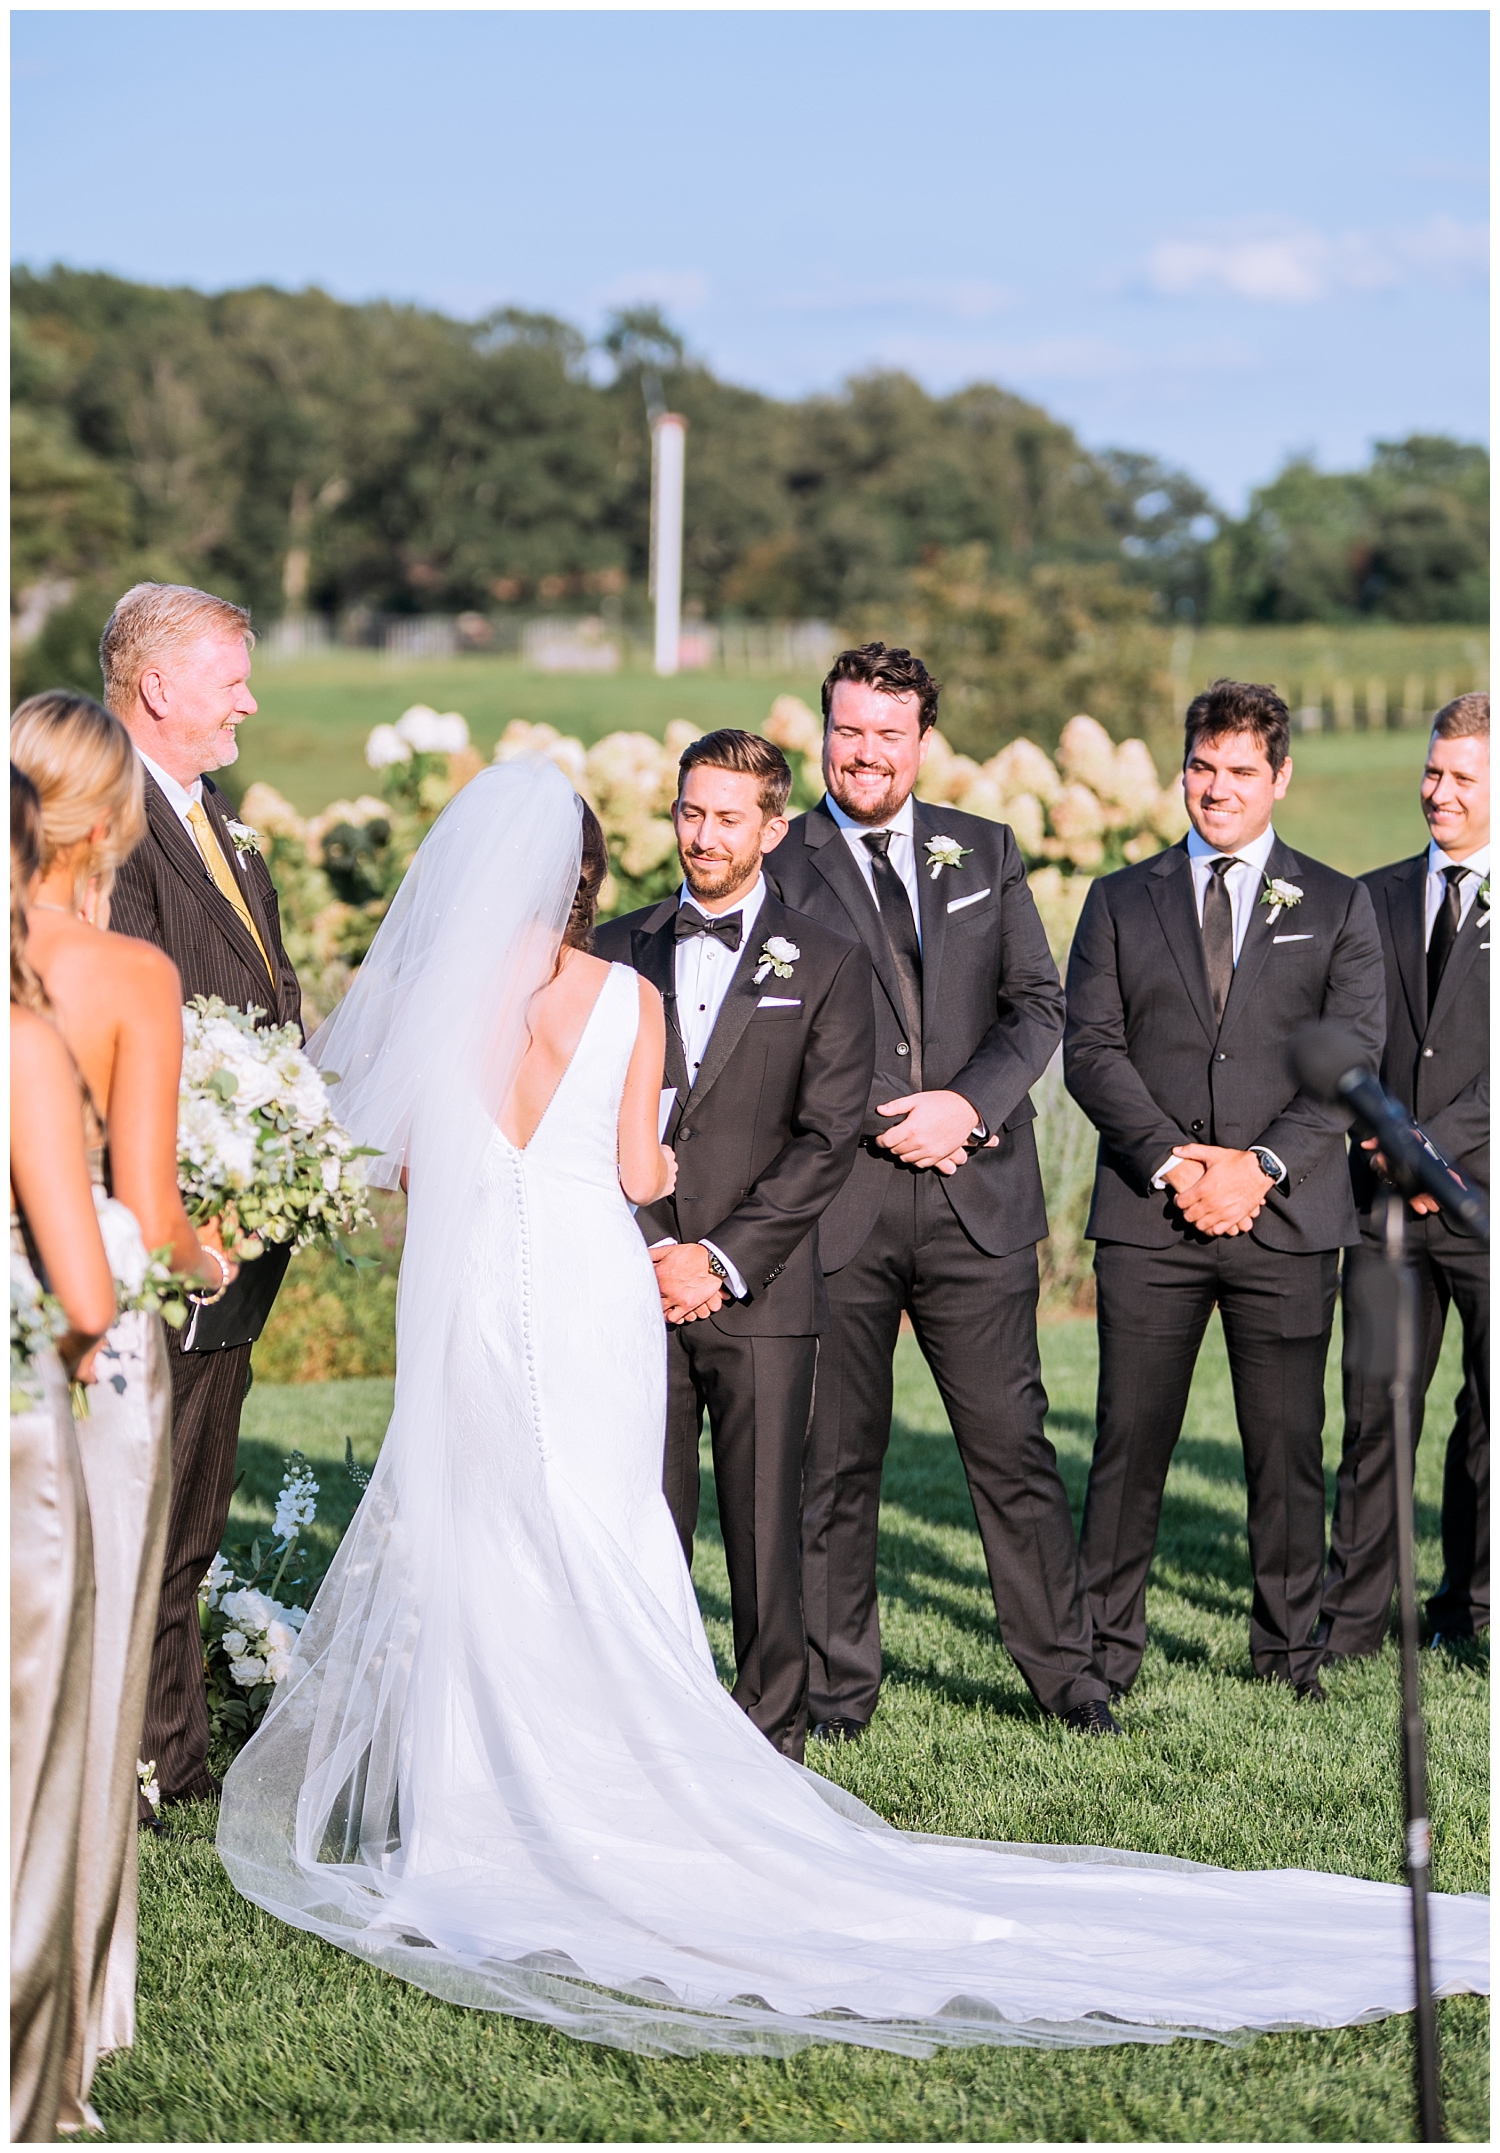 Bride and Groom at ceremony at Early Mountain Vineyard Wedding